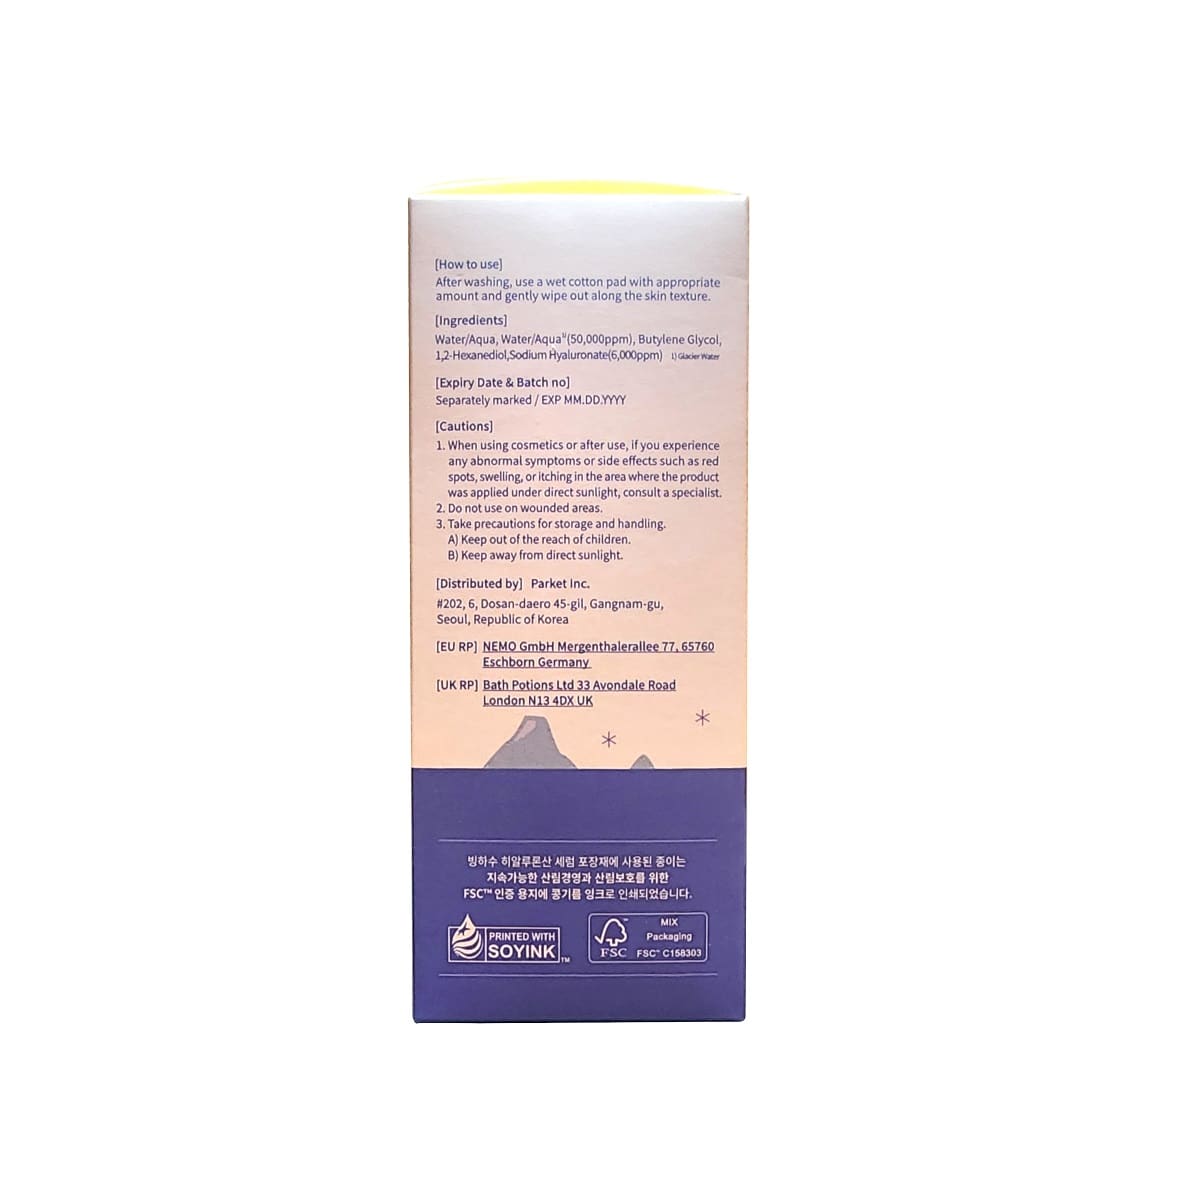 How to use, Ingredients, Cautions for mixsoon Glacier Water Hyaluronic Acid Serum (300 mL) in English